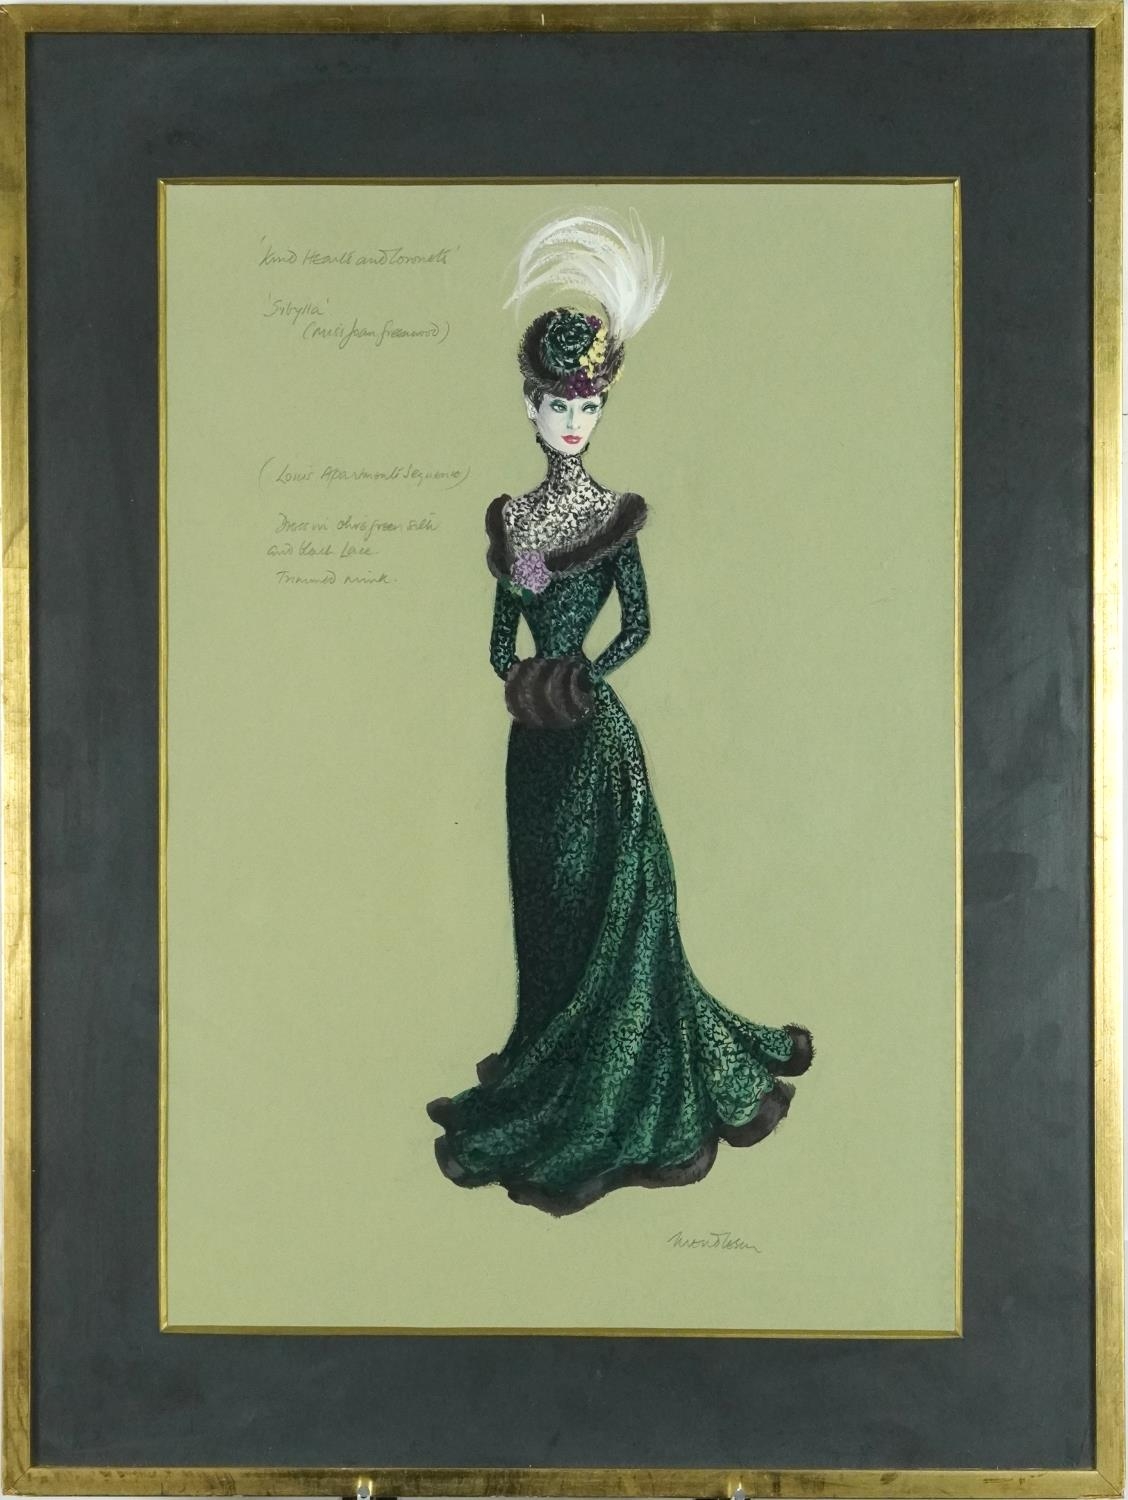 Anthony Mendleson - Sibylla, full length portrait of a female, heightened watercolour costume - Image 2 of 4